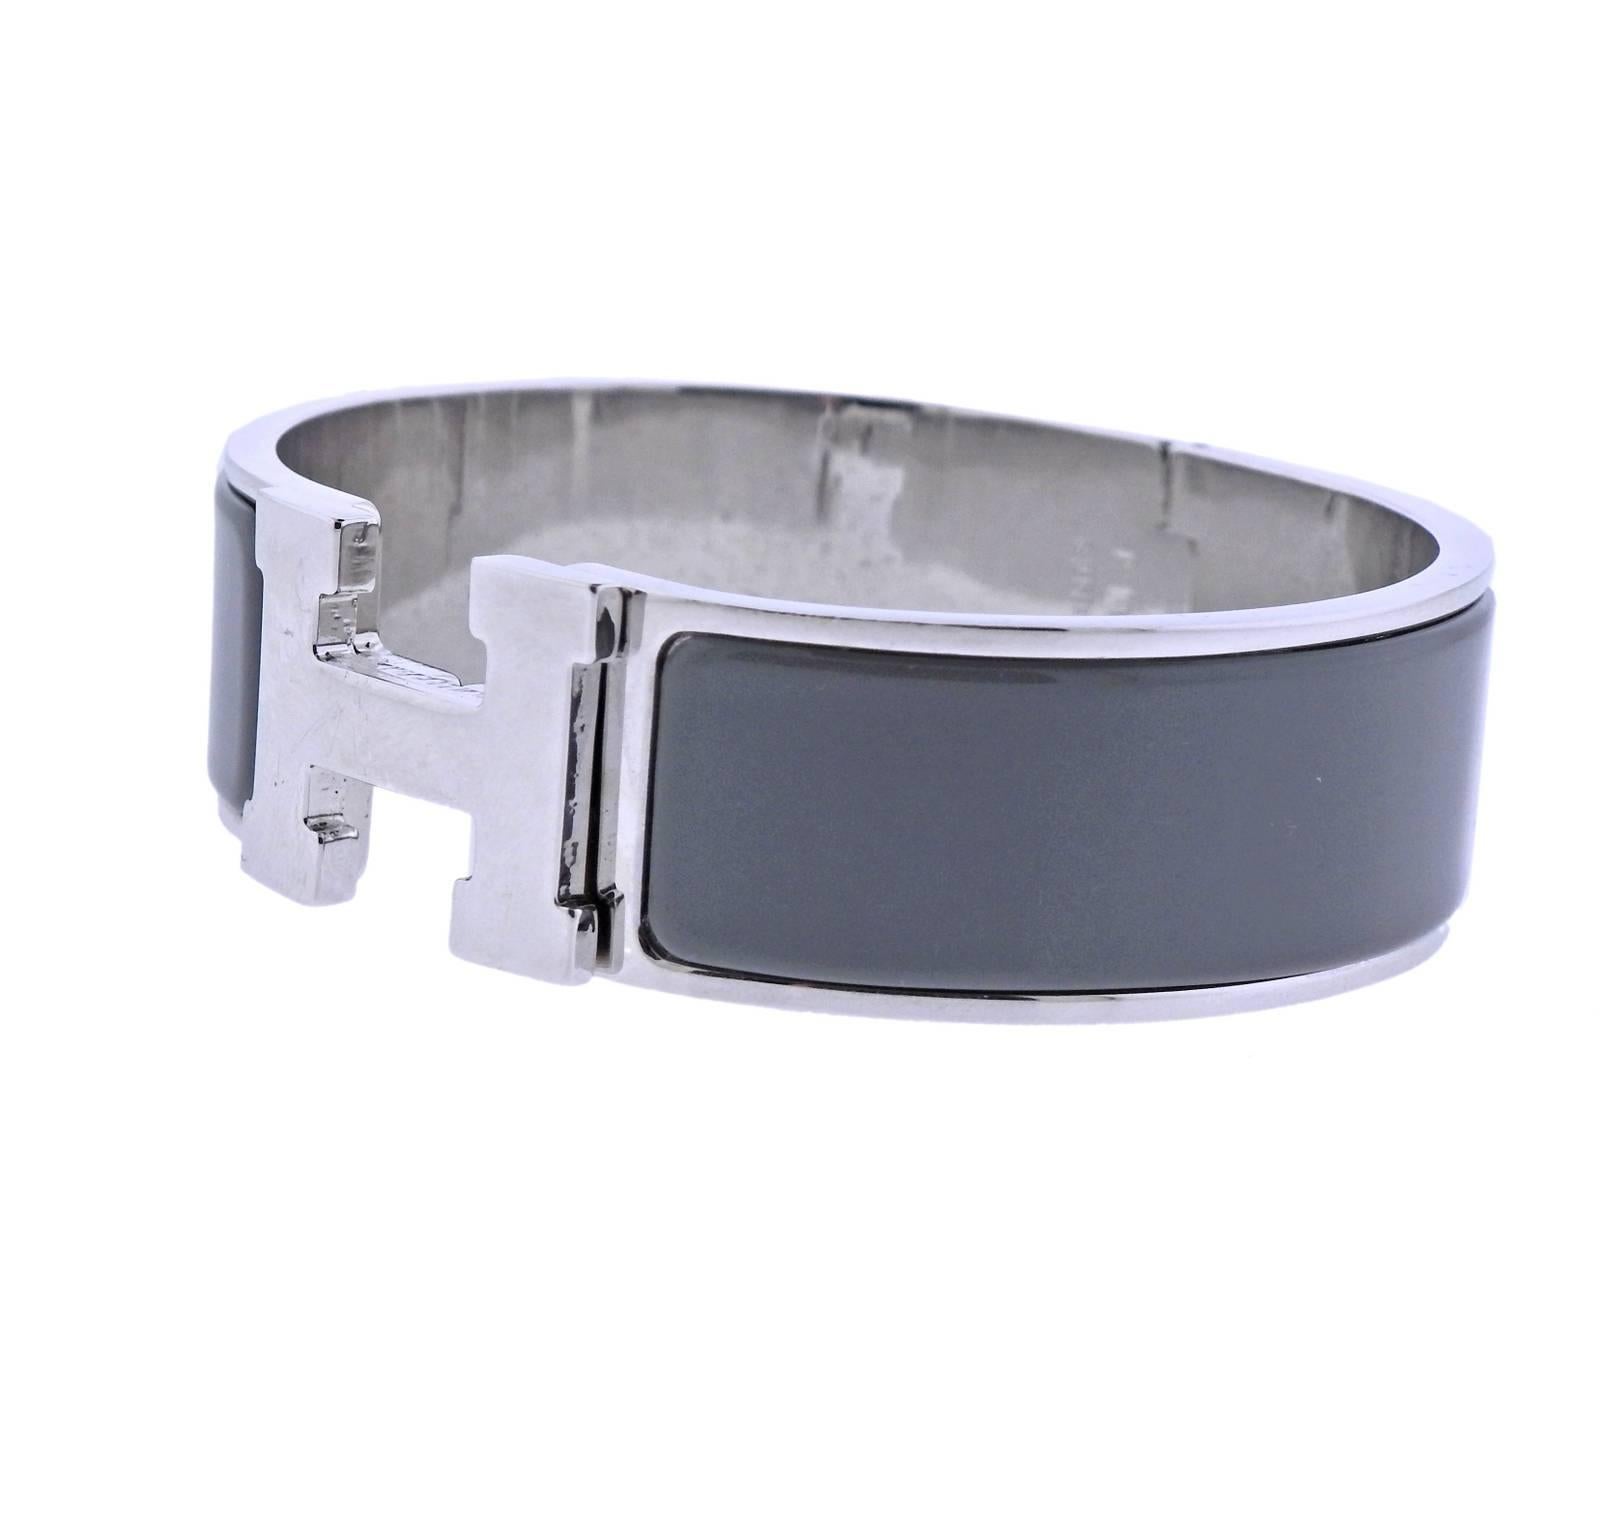 Iconic Clic Clac H bracelet, crafted by Hermes, decorated with grey enamel. Retail $660. Bracelet will fit approx. 7.25